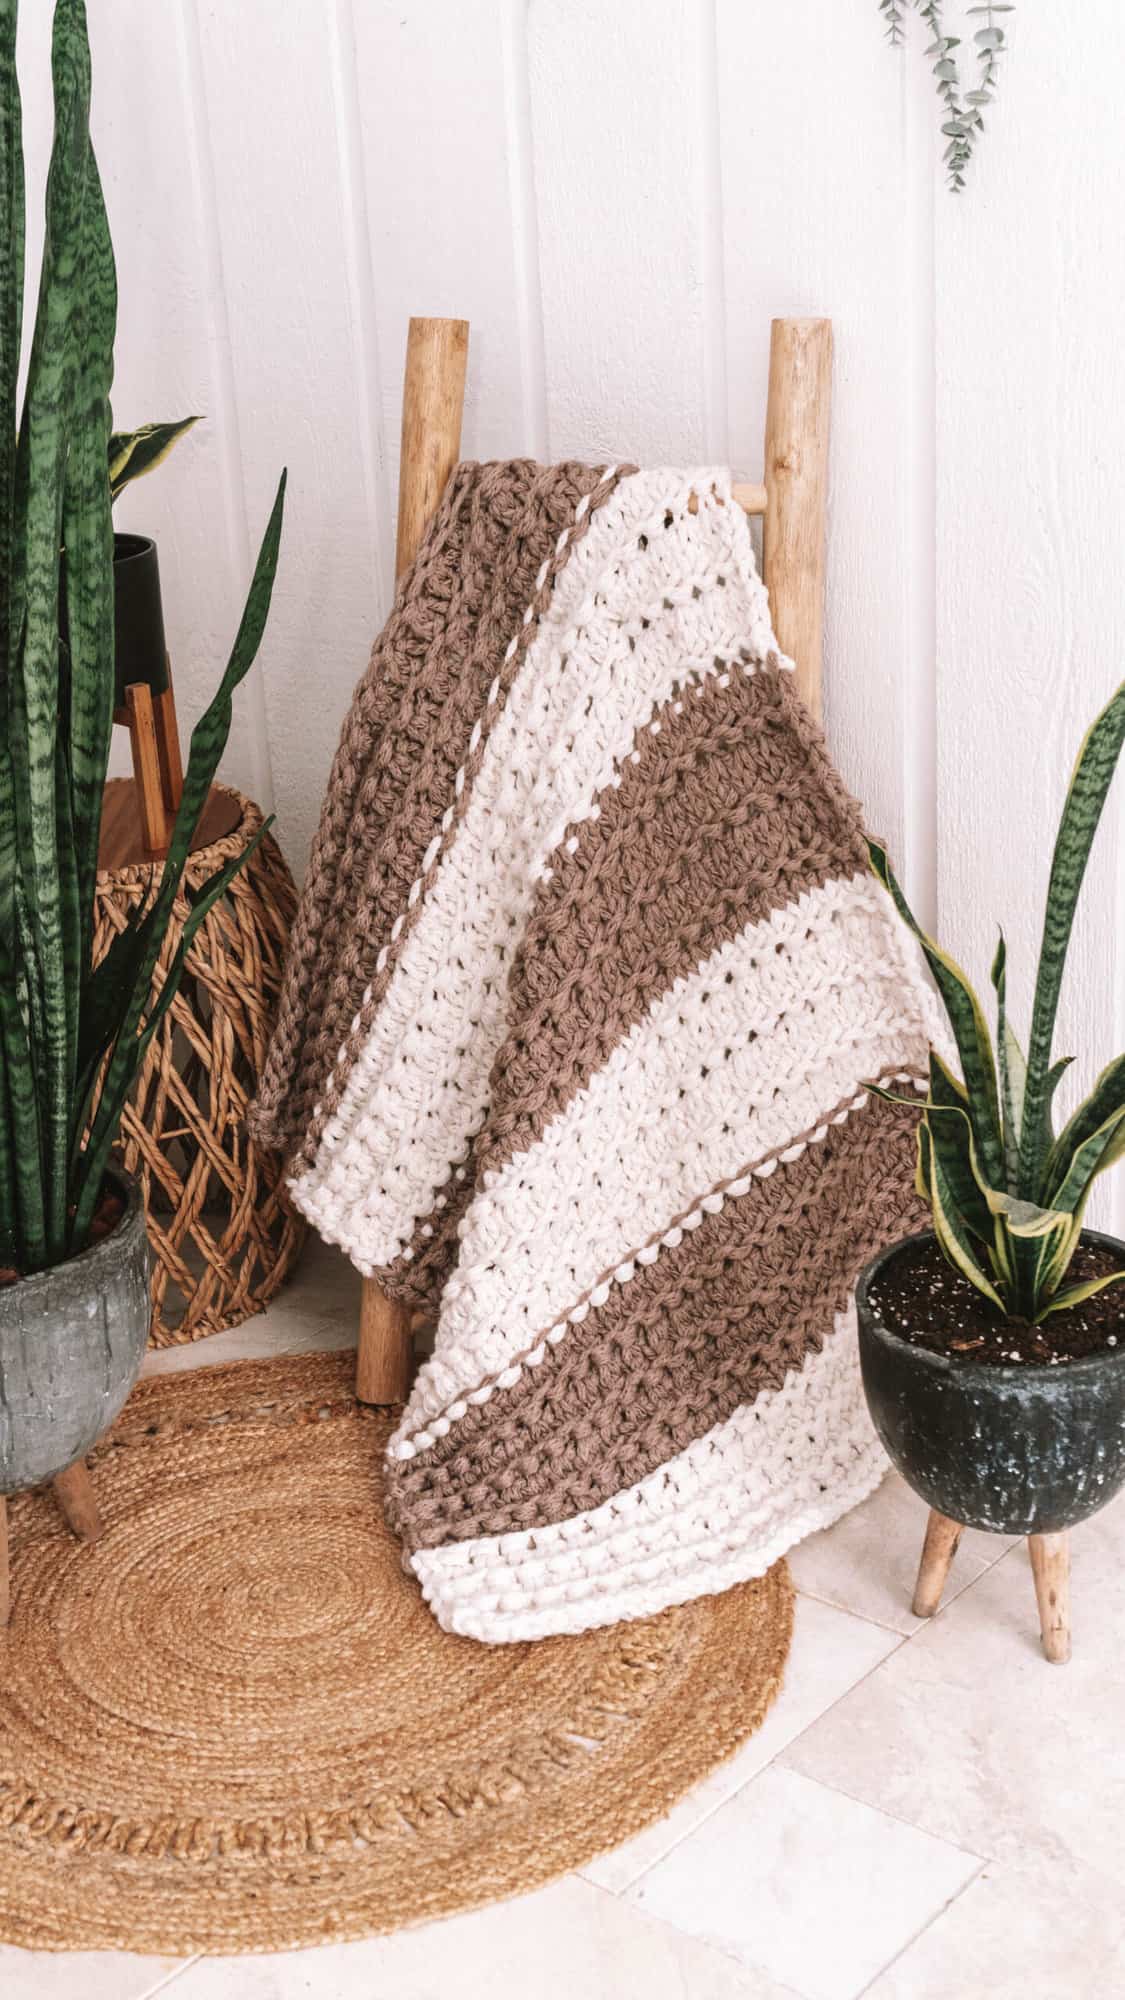 Knit a Cozy Blanket with the Stockinette Ridge Stitch Free Pattern